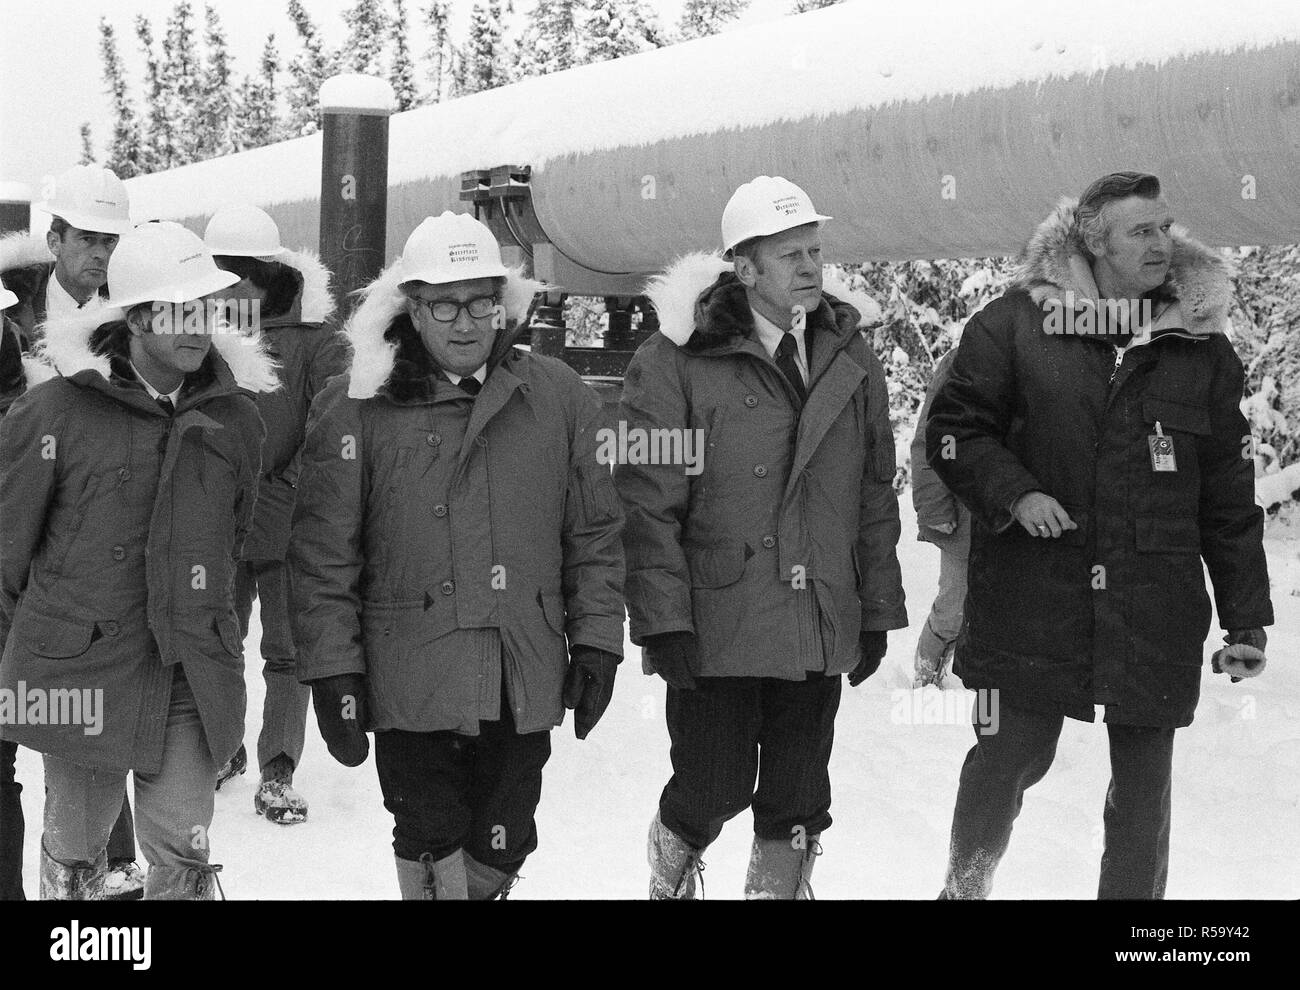 November 29 1975 – Alyeska Pipeline Service Company Pump Station #8 – Fairbanks, AK – Federal Energy Administration Administrator Frank Zarb, Secretary of State Henry Kissinger, and President Ford Touring the Trans-Alaska Pipeline wearing hard hats, arctic weather gear Stock Photo